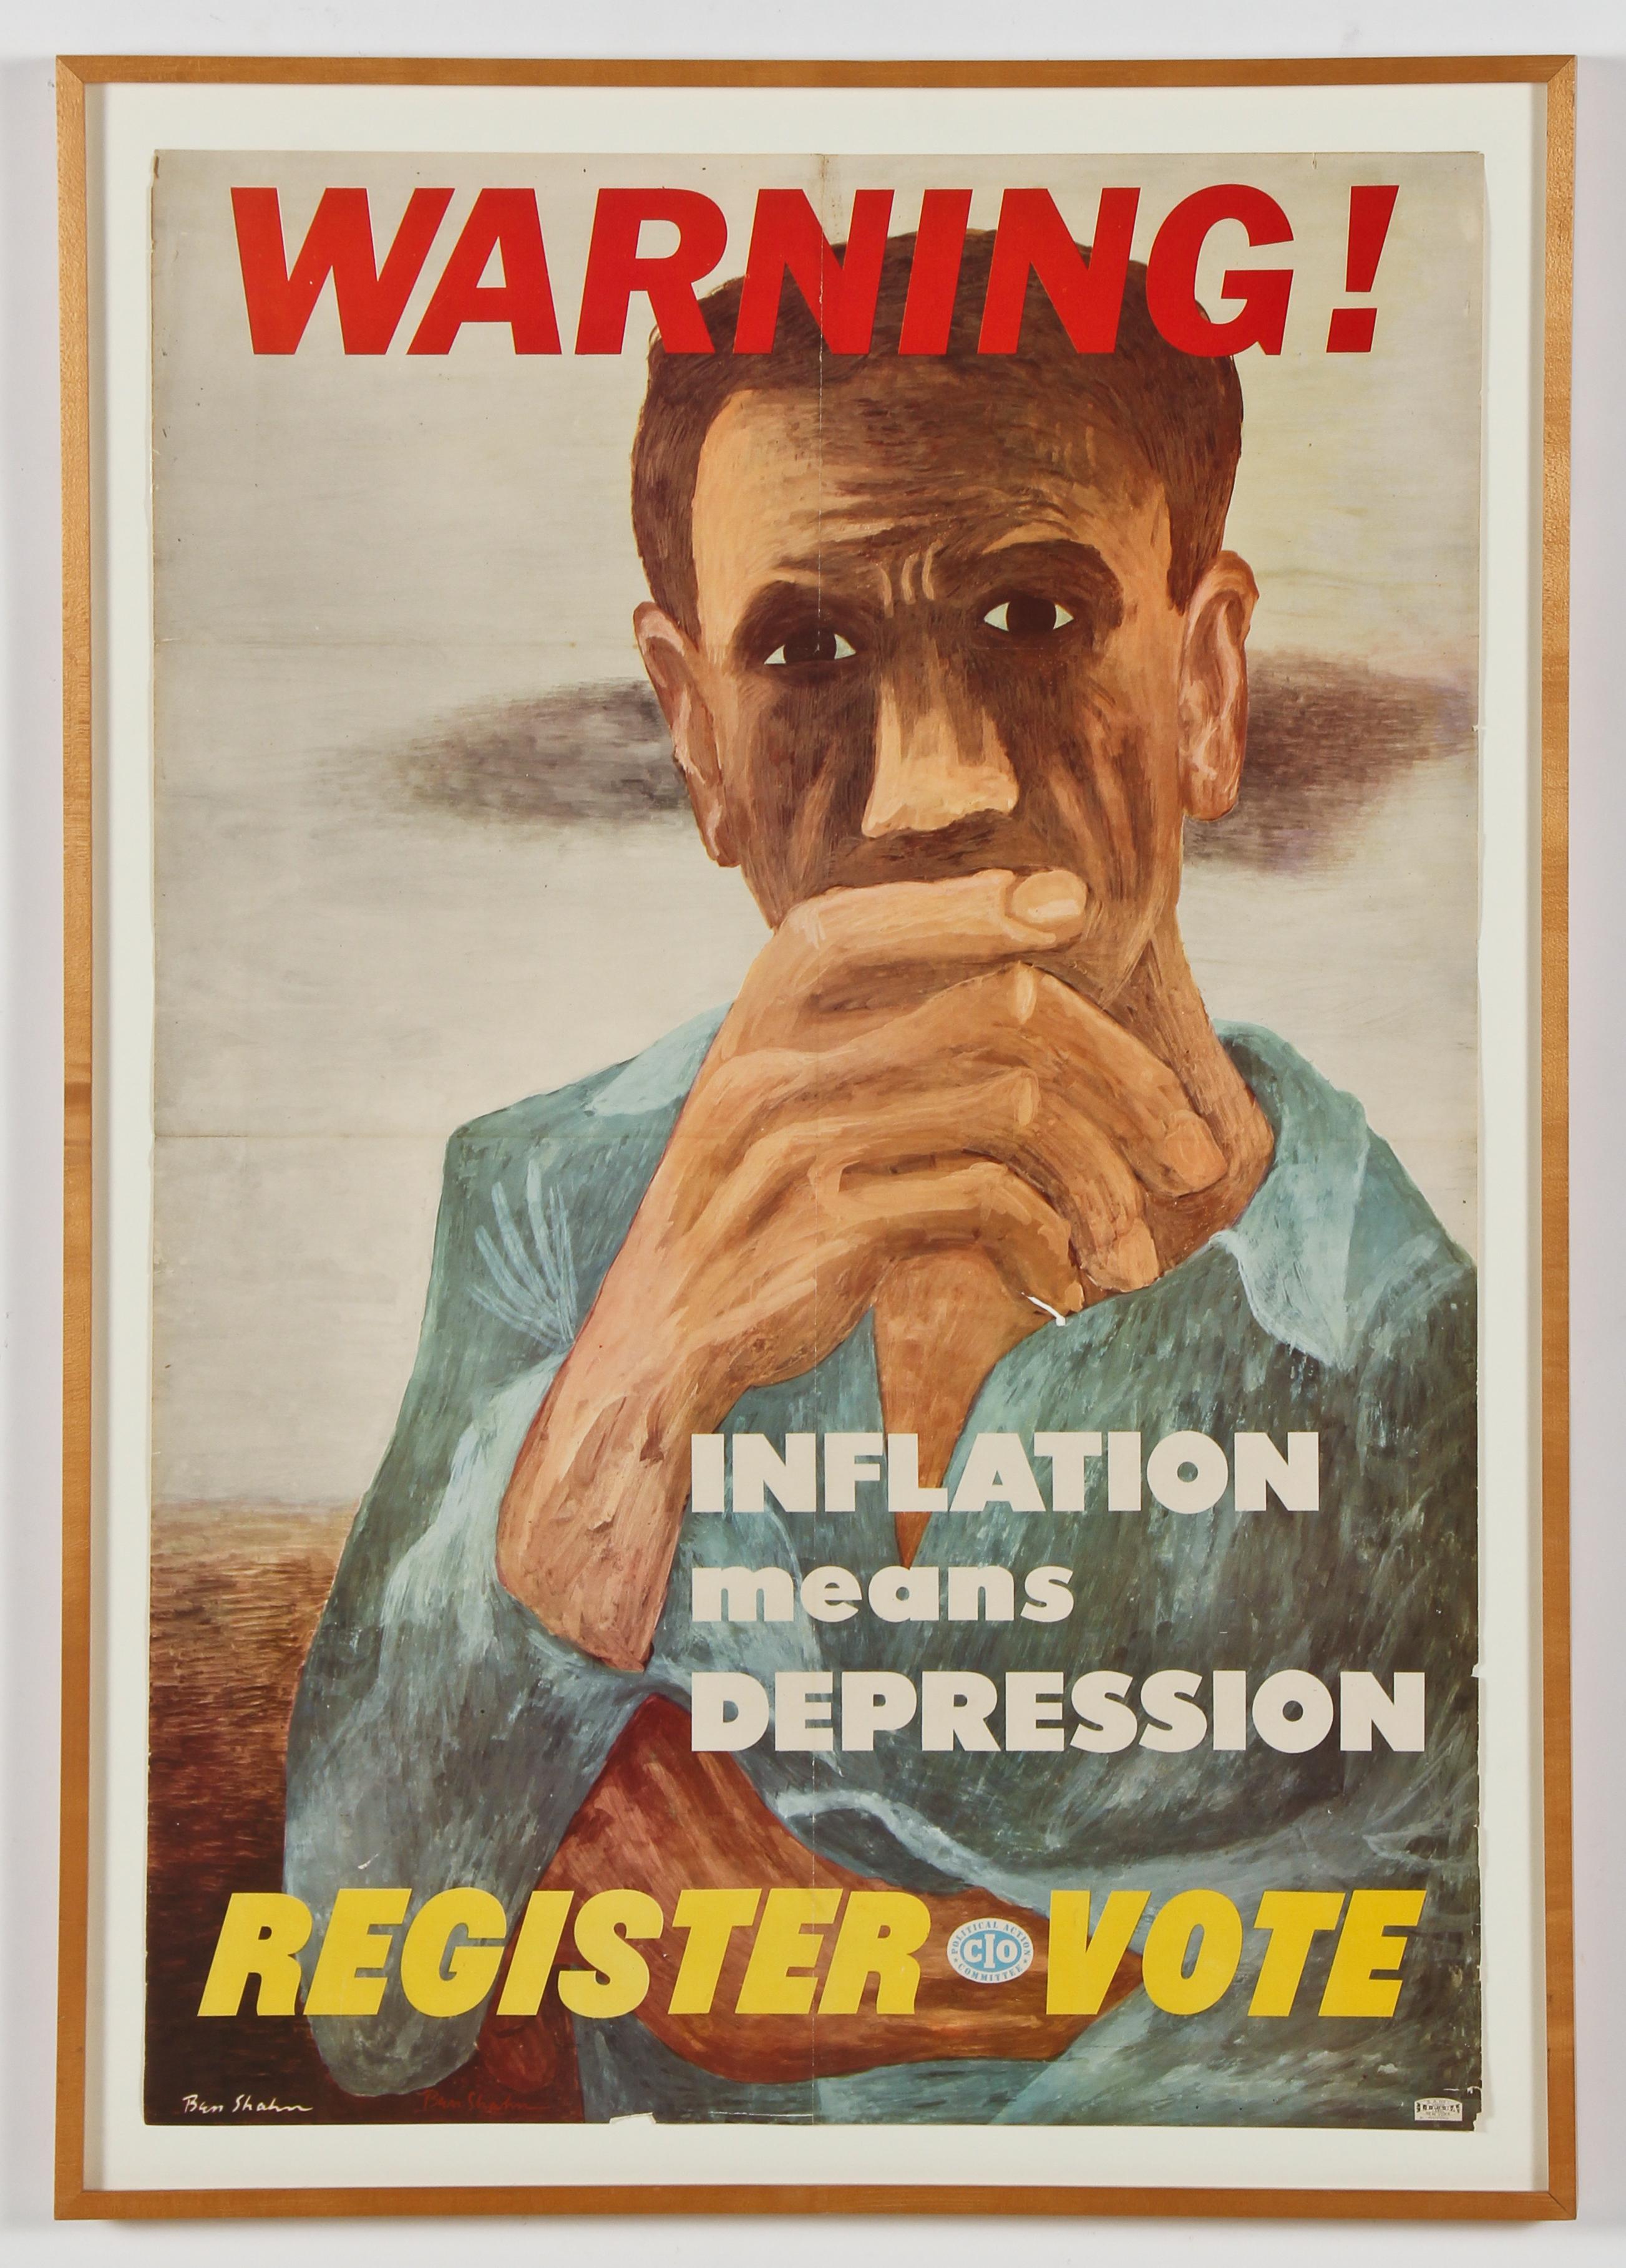 WARNING! Register*Vote, INFLATION means DEPRESSION
Photo lithograph, 1946
Signed in the image lower left
Published by CIO (Congress of Industrial Organizations) before their merger with the AFL (American Federation of Labor) see photo
Edition: